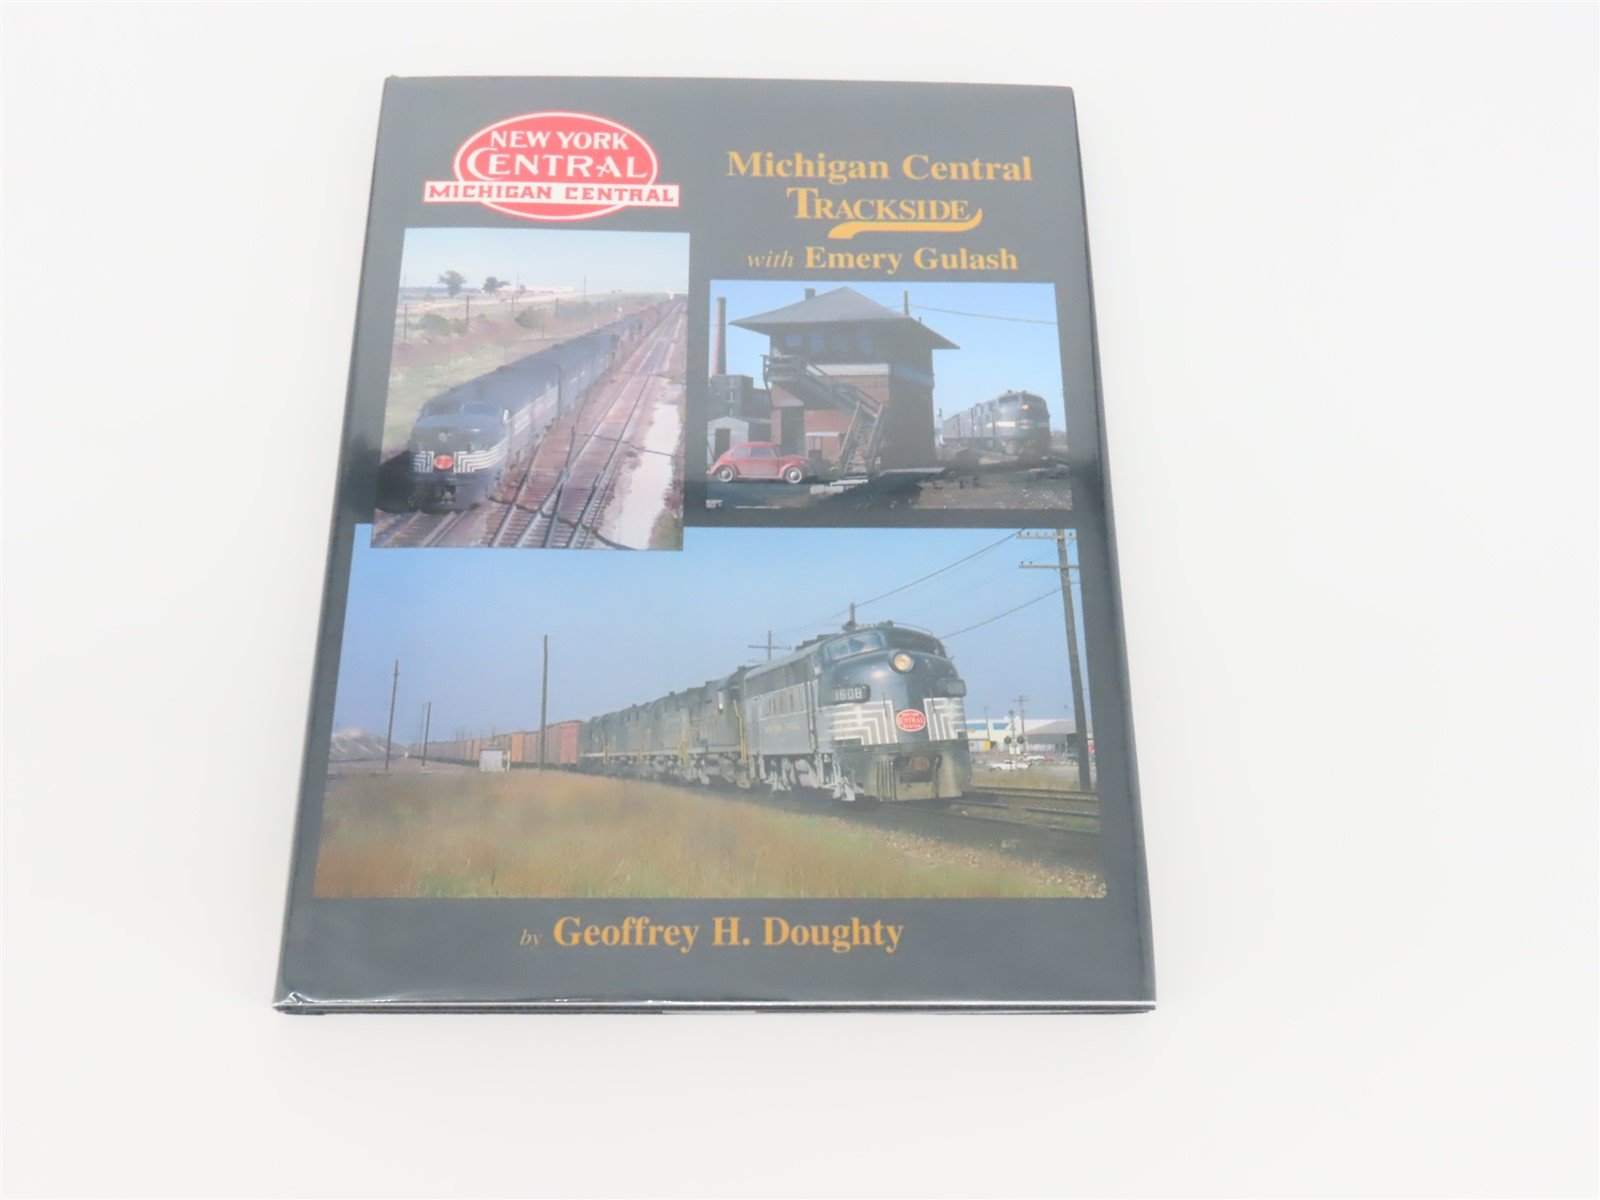 Morning Sun: Michigan Central Trackside by Geoffrey H. Doughty ©2001 HC Book